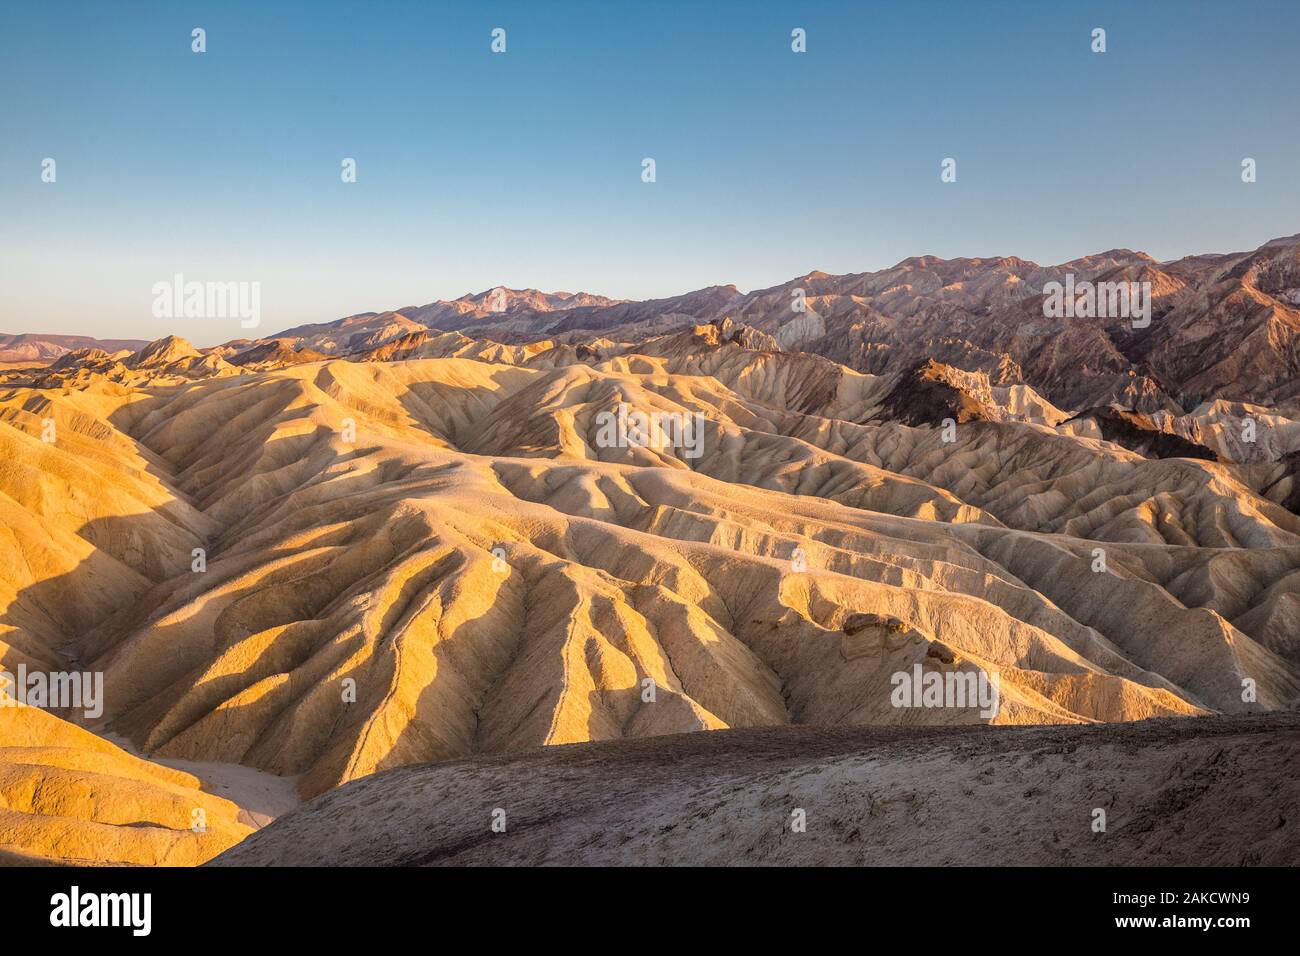 Scenic view of sandstone formations at famous Zabriskie Point viewpoint in beautiful golden evening light at sunset, Death Valley National Park, USA Stock Photo